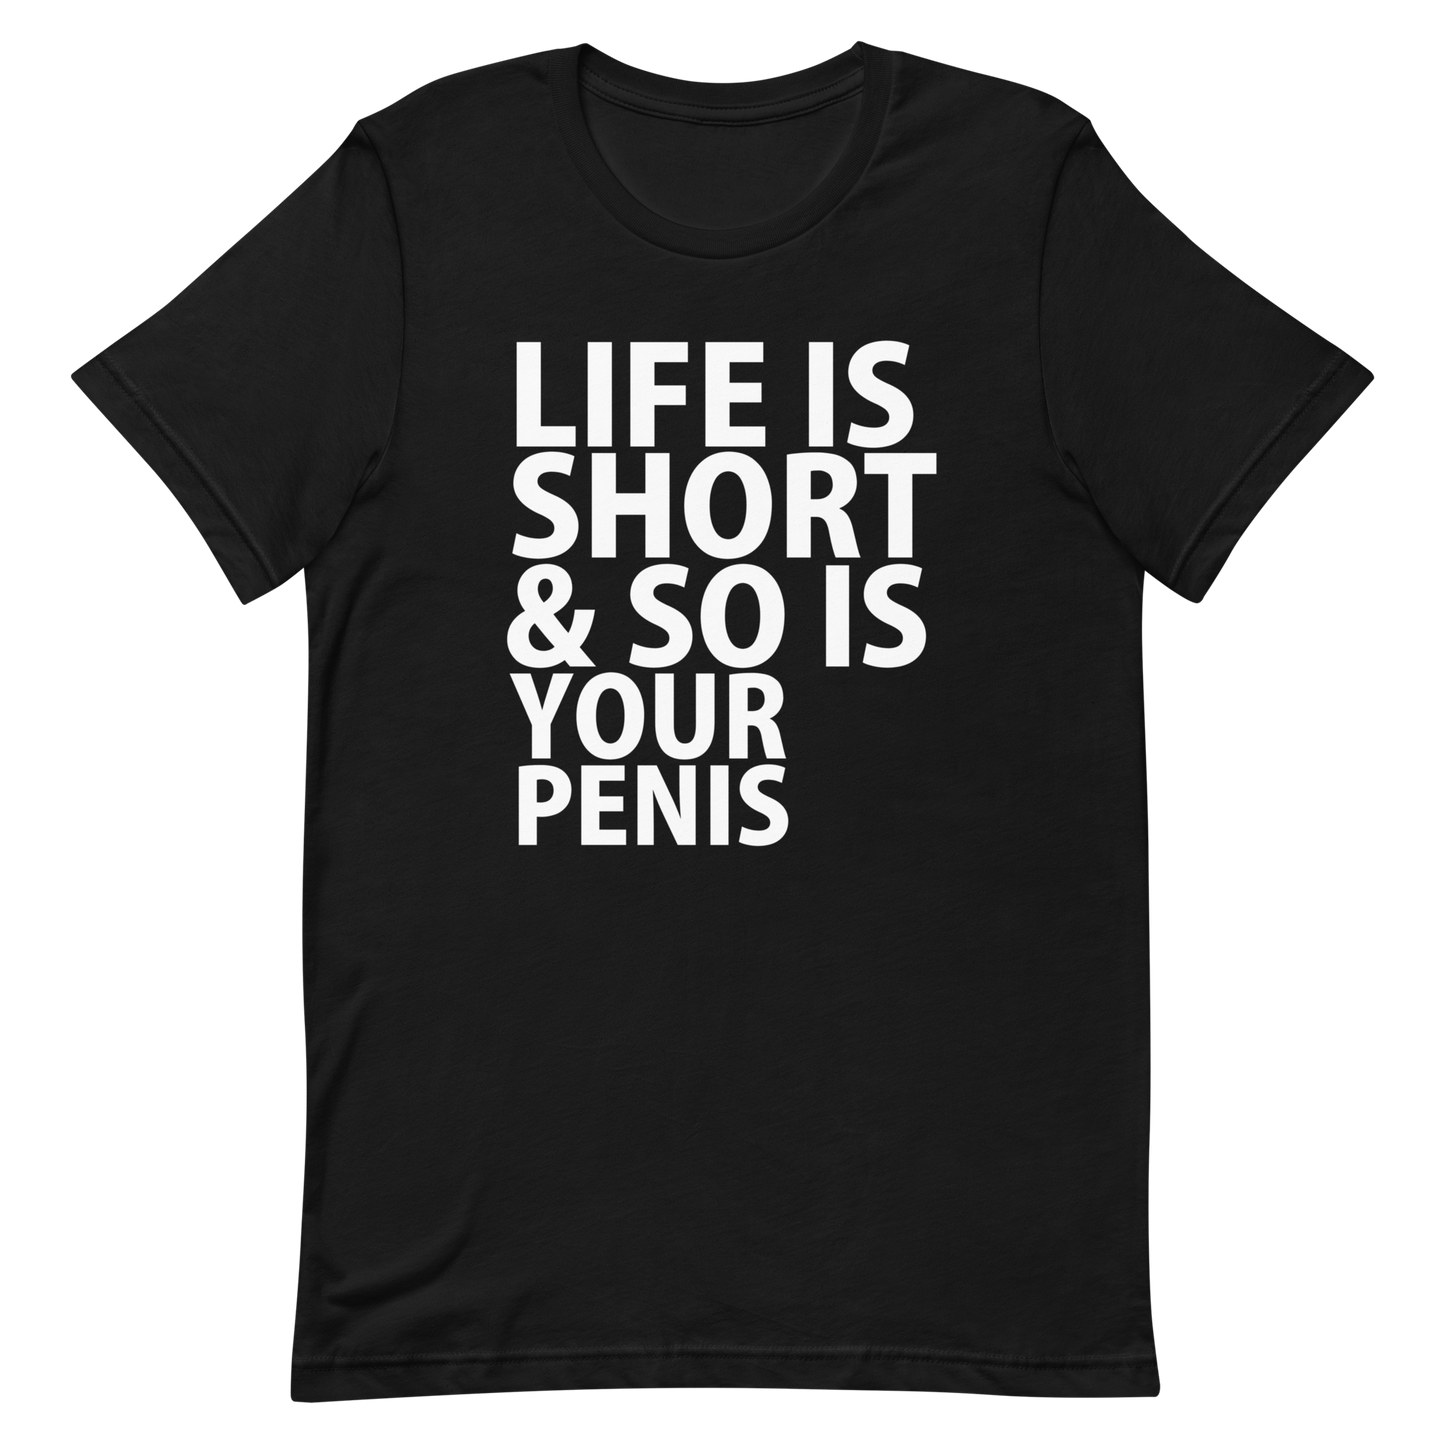 Life Is Short & So Is Your Penis T-Shirt - Black